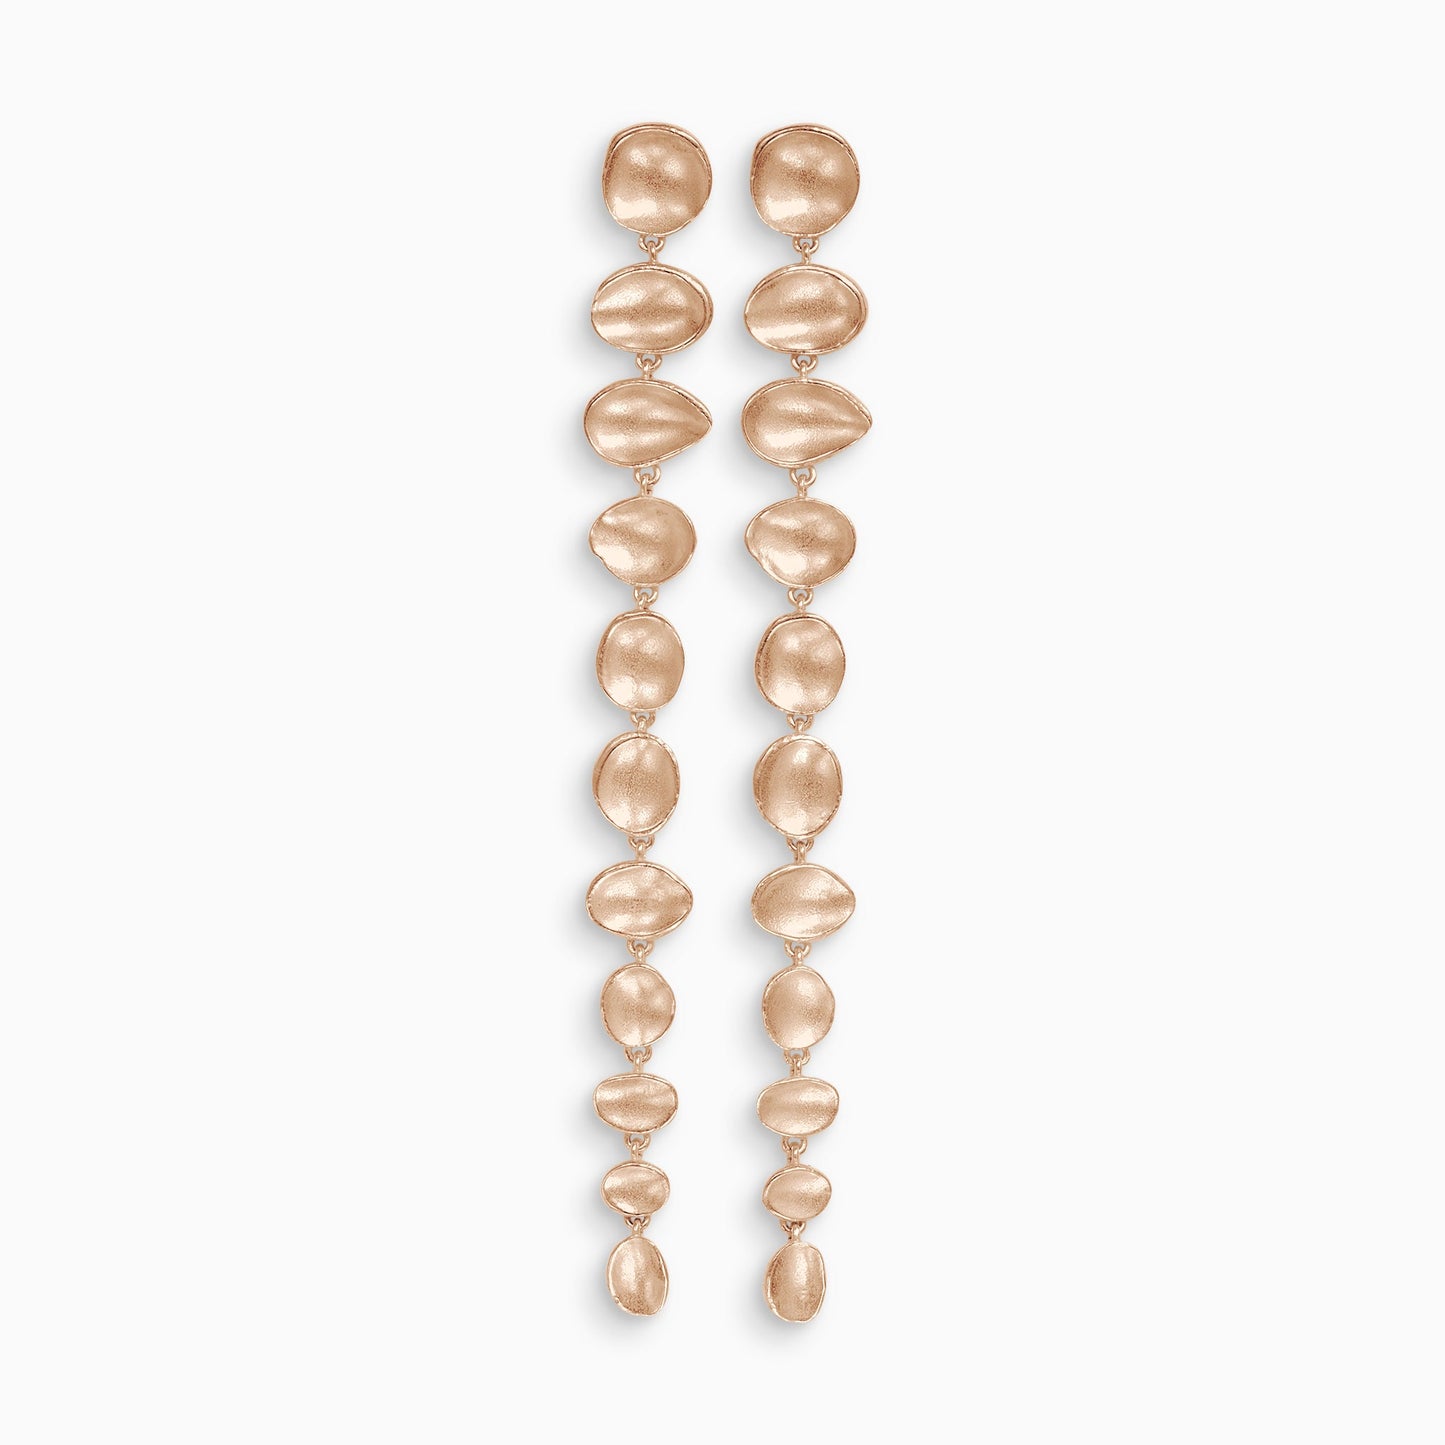 A pair of 18ct Fairtrade rose gold drop earrings. A line of 11 articulating concave discs of various organic shapes and sizes with a stud ear fastening on the top disc. Satin finish. 105mm length, 10mm width.